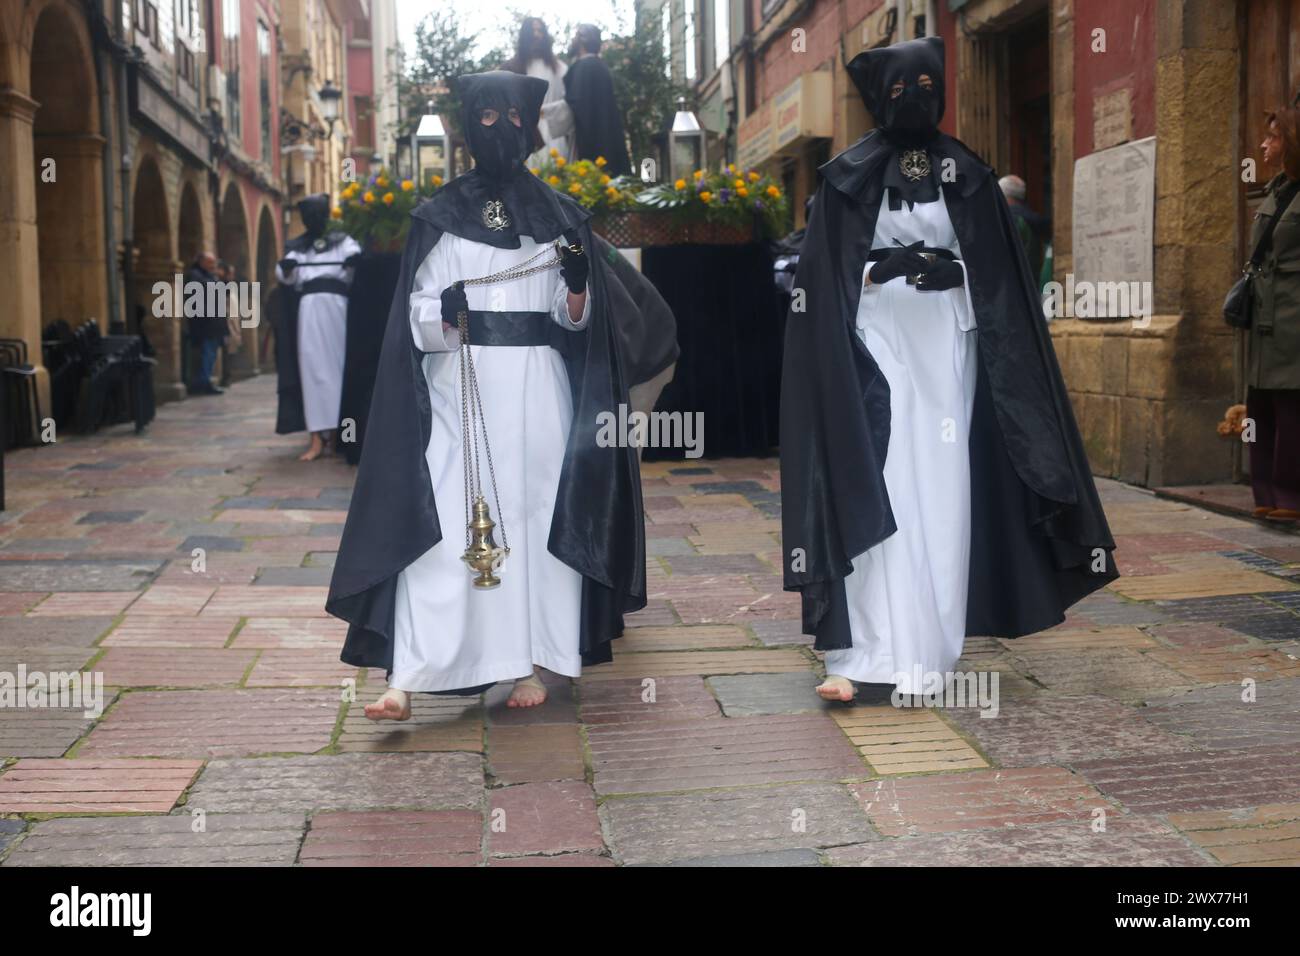 Aviles, Spain, March 28, 2024: Two Nazarenes carry incense during the Judas Kiss Procession, on March 28, 2024, in Aviles, Spain. Credit: Alberto Brevers / Alamy Live News. Stock Photo